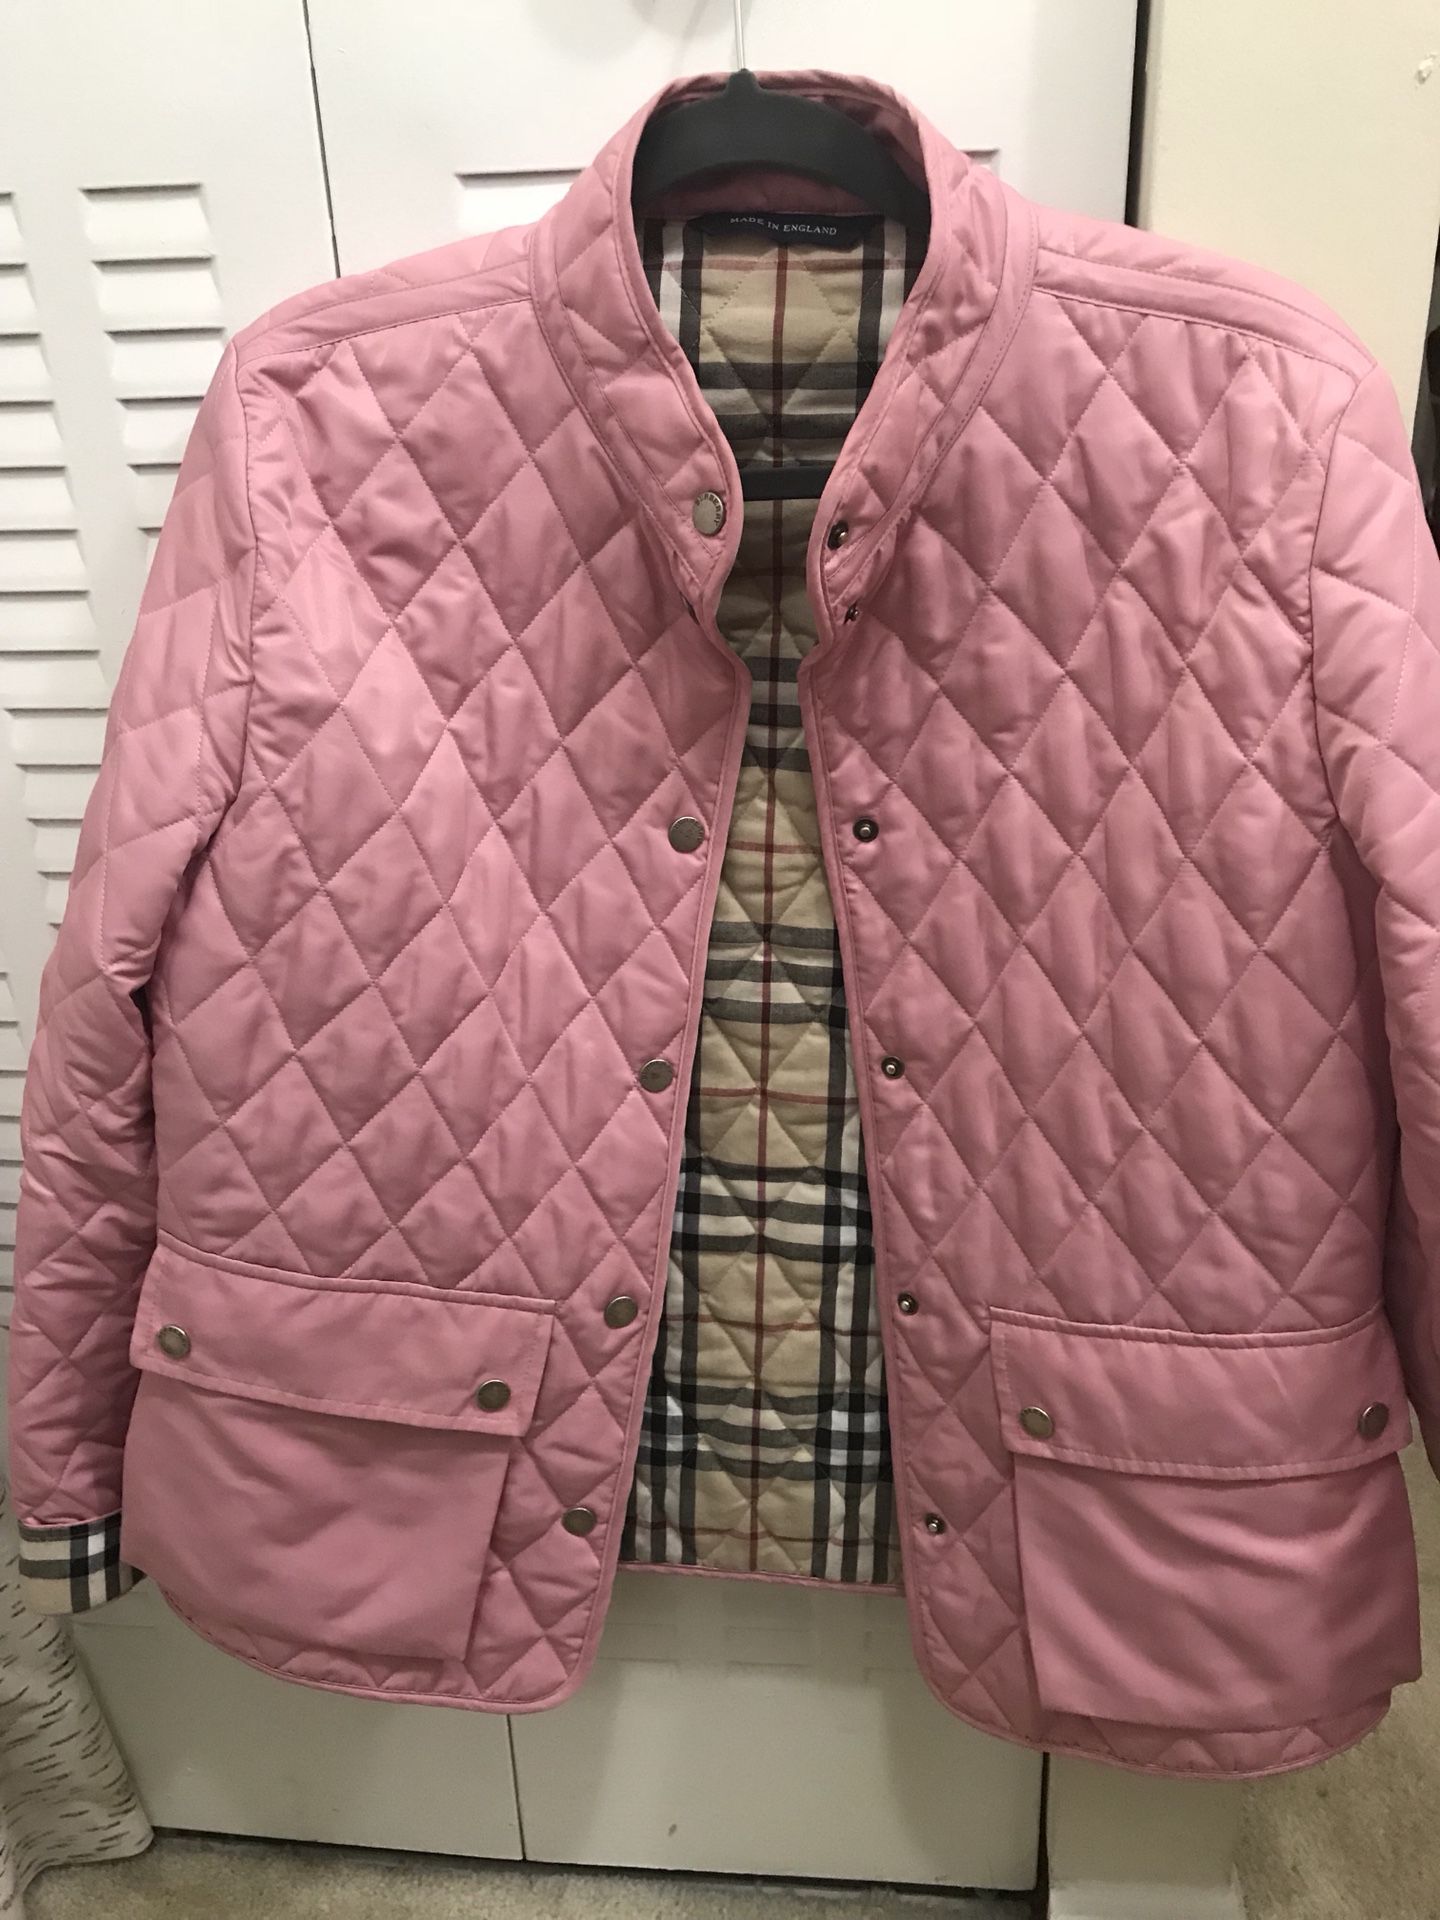 Authentic Light Pink Burberry Jacket size S/M